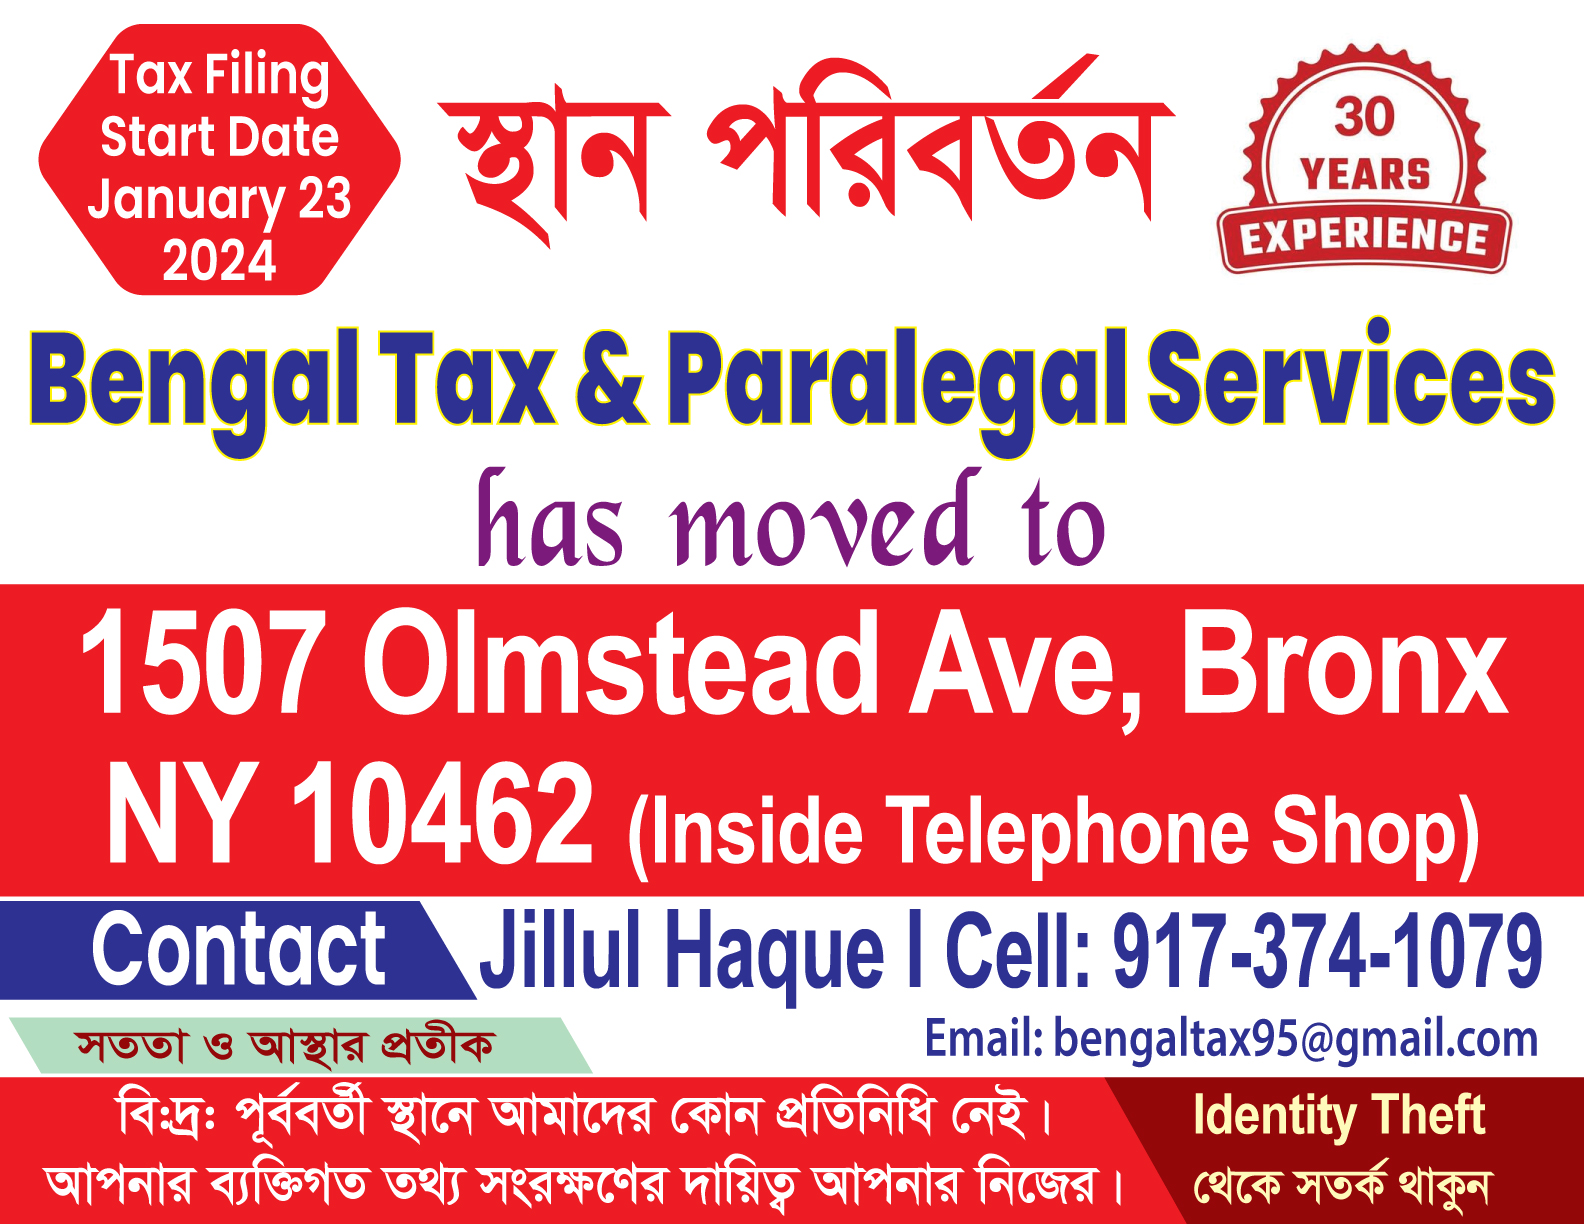 Bengal Tax & Paralegal Services